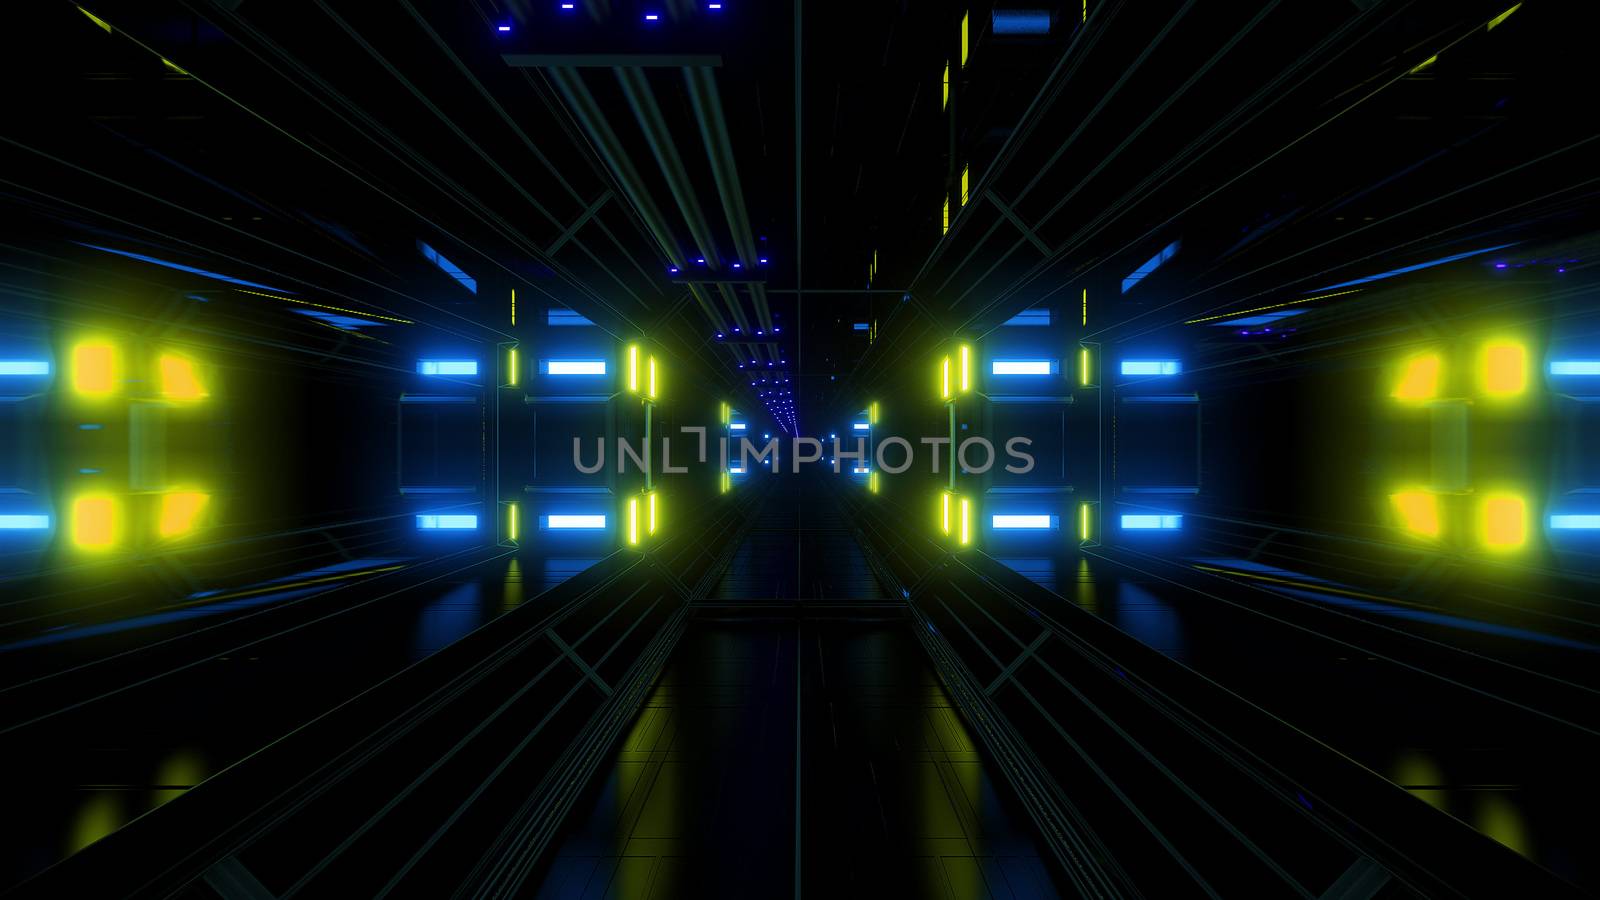 futuritstic science fiction space hangar tunnel background by tunnelmotions